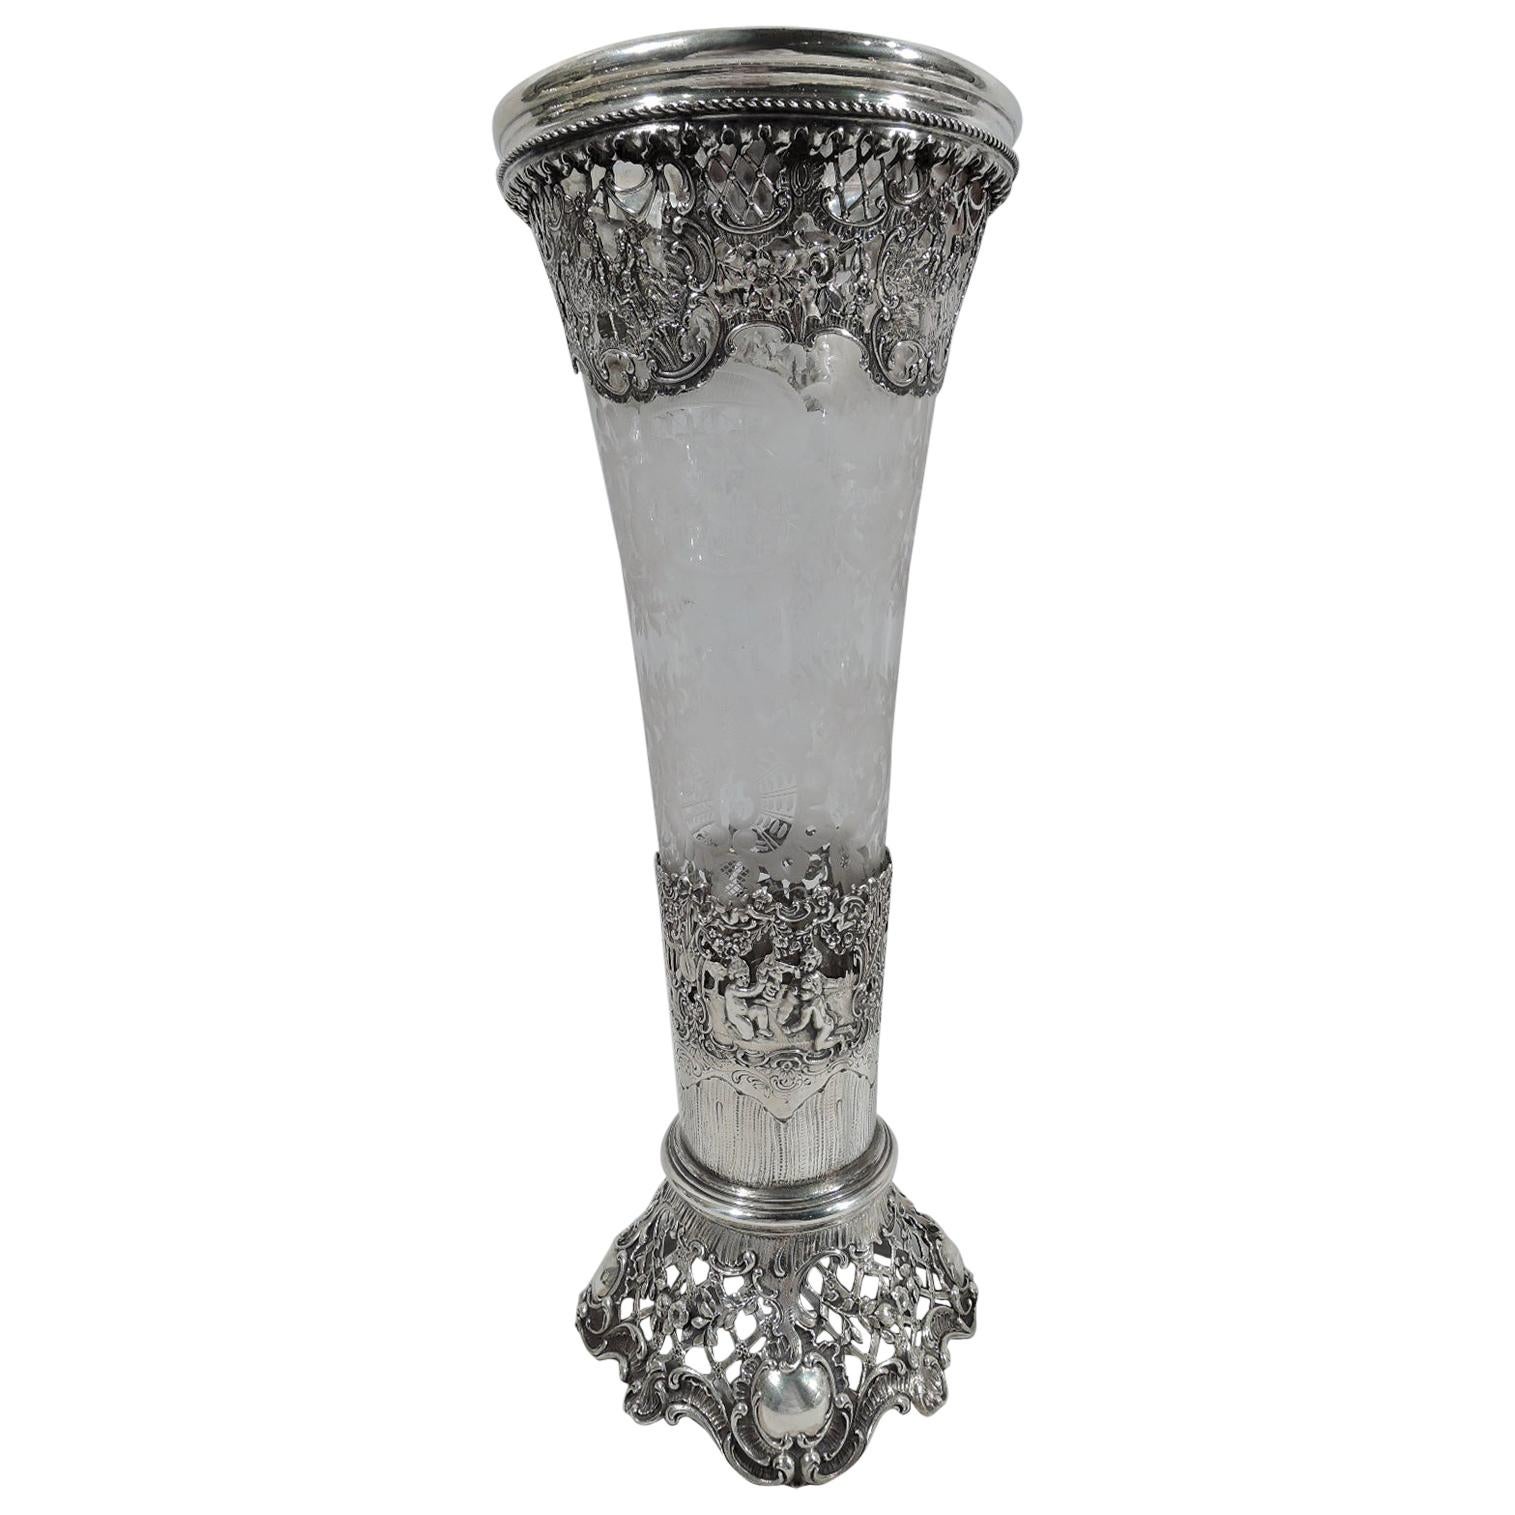 Antique German Silver and Glass Trumpet Vase